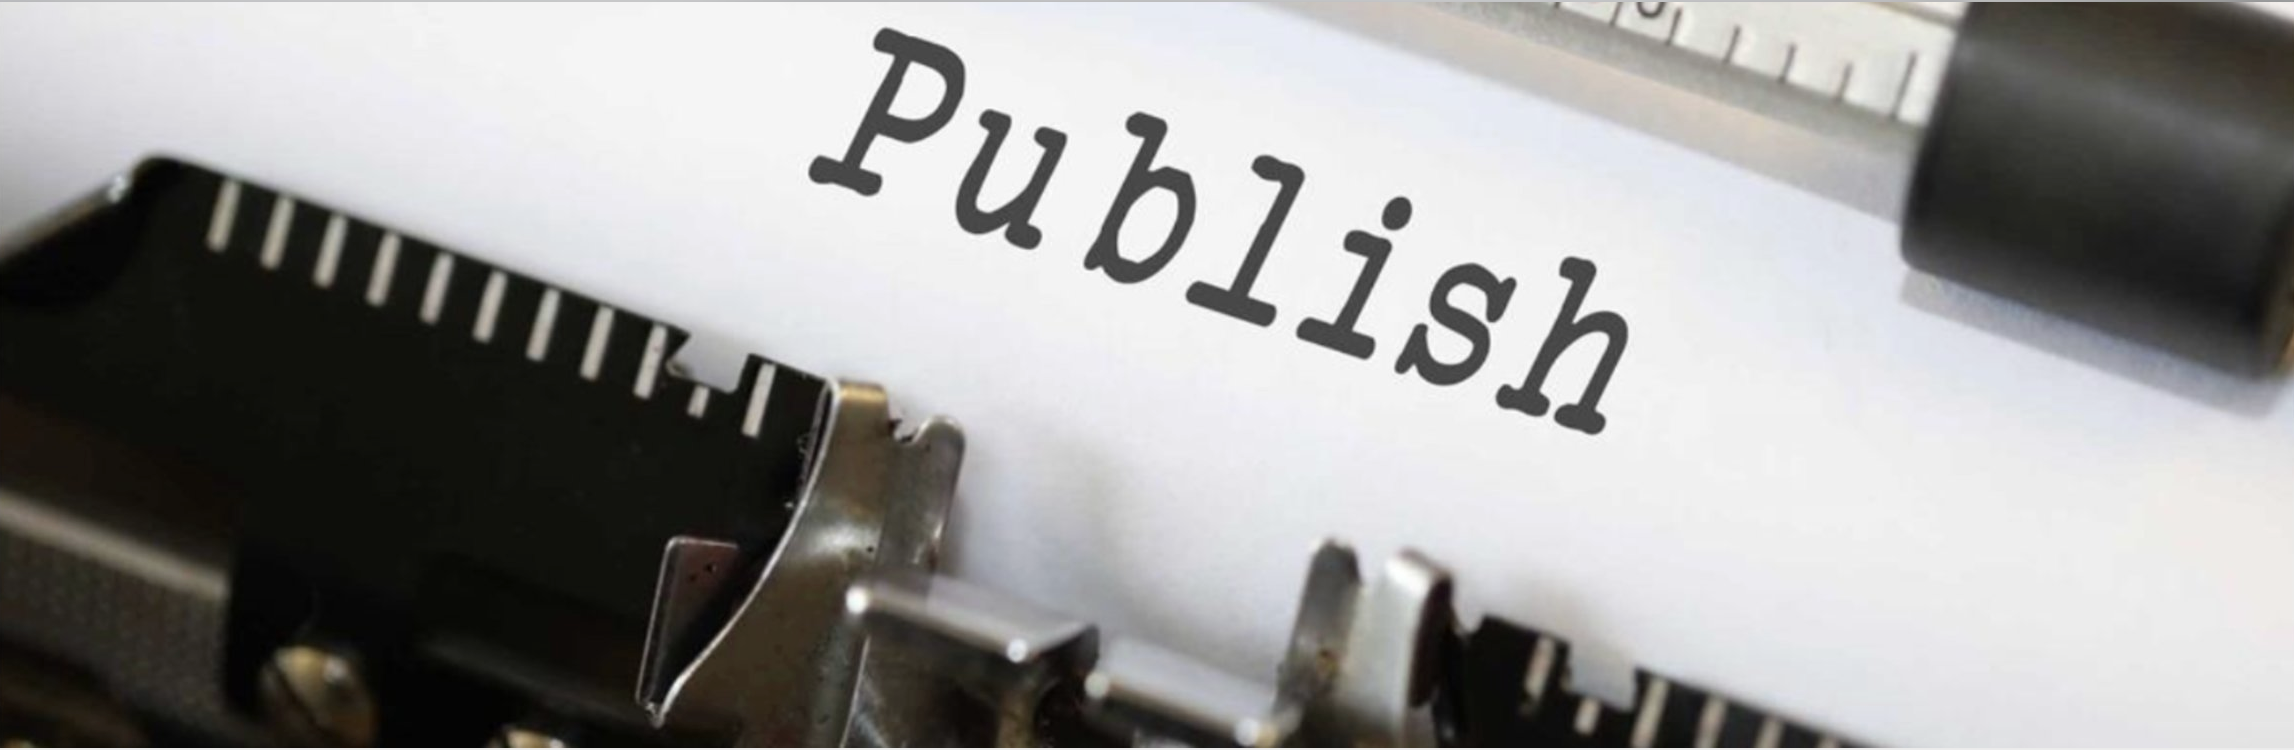 Meet the Publishing Industry event, 16 April